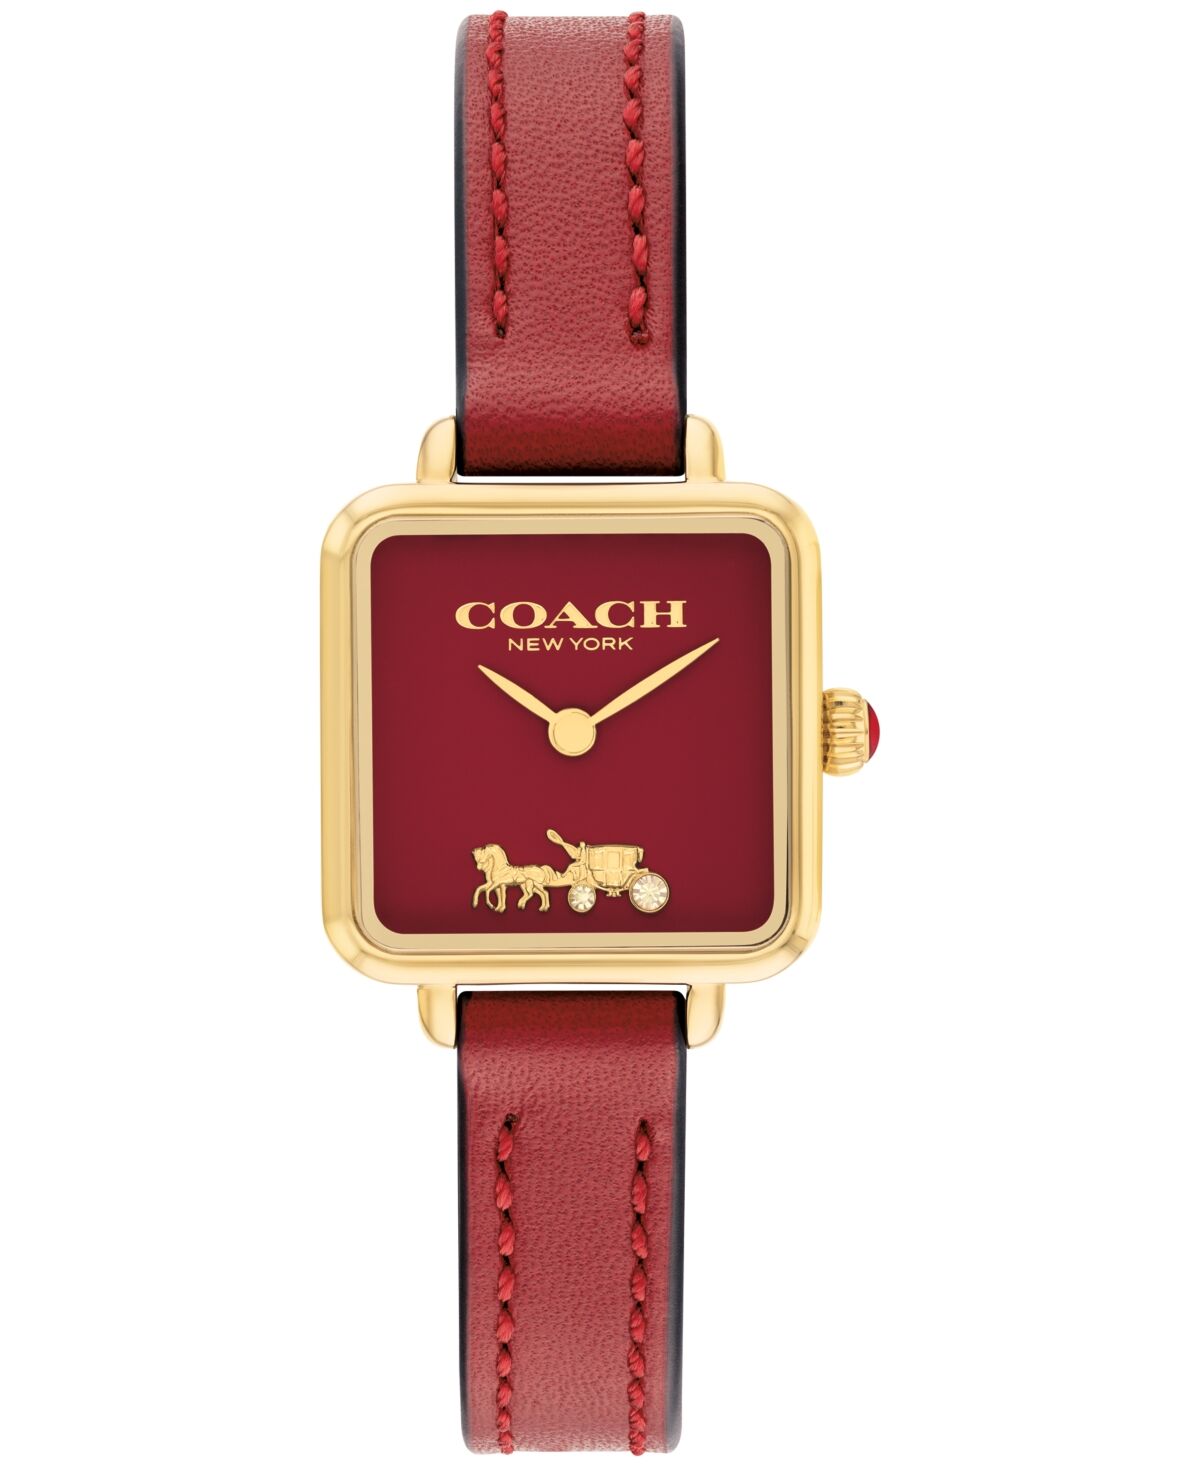 Coach Women's Cass Signature Horse and Carriage Red Leather Strap Watch, 22mm - Red